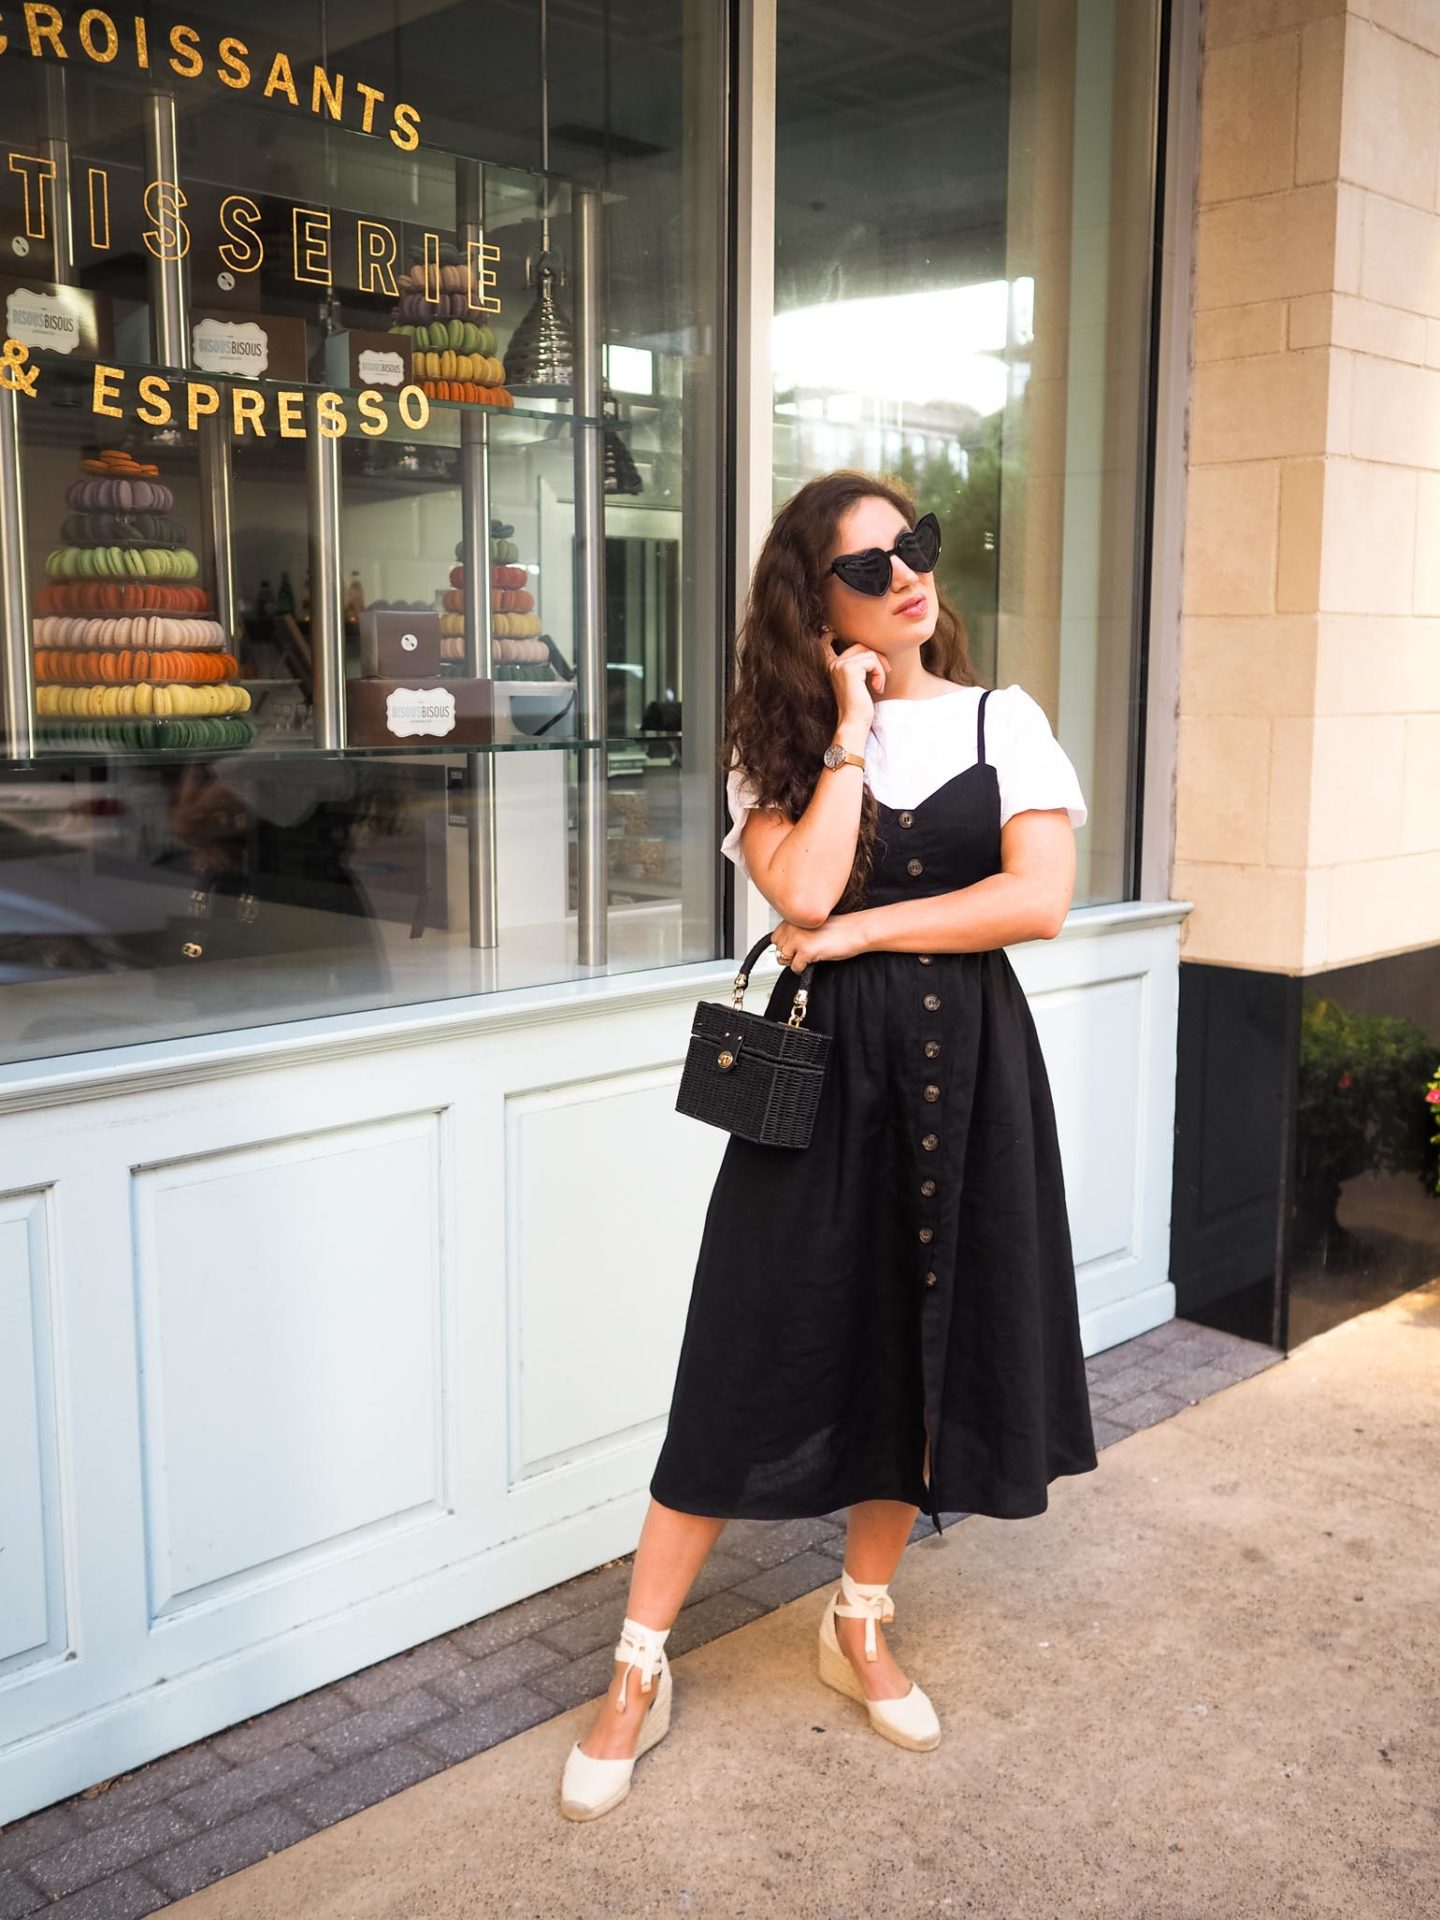 What I Wore in June: Instagram Outfit Round Up - The Brunette Nomad